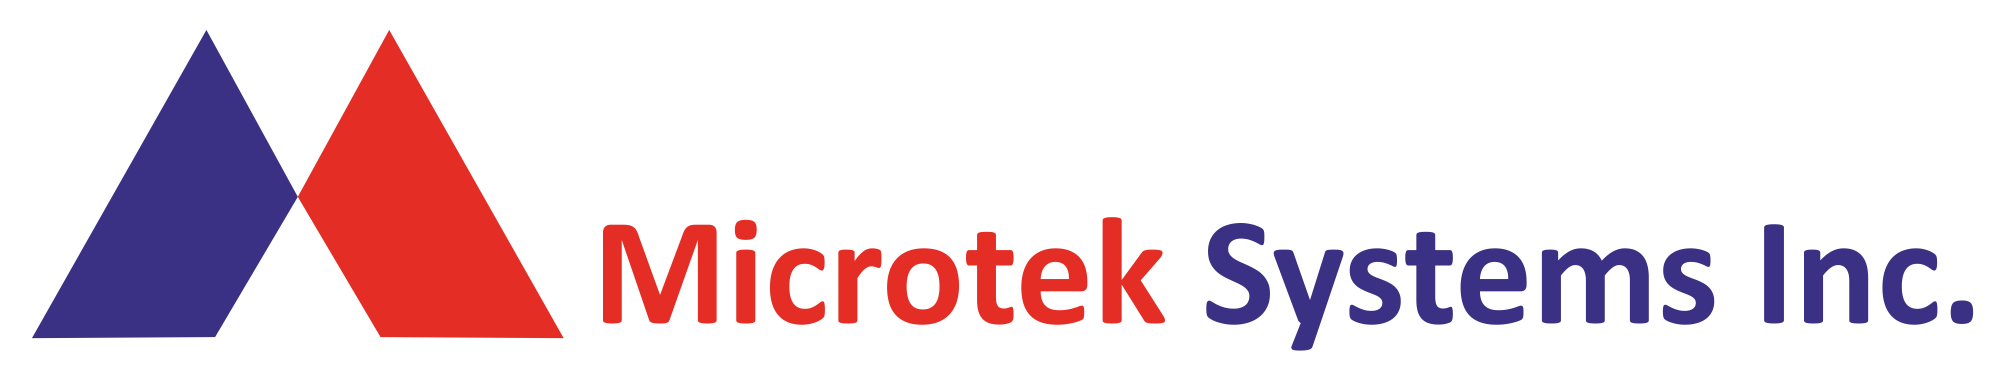 Microtek Systems